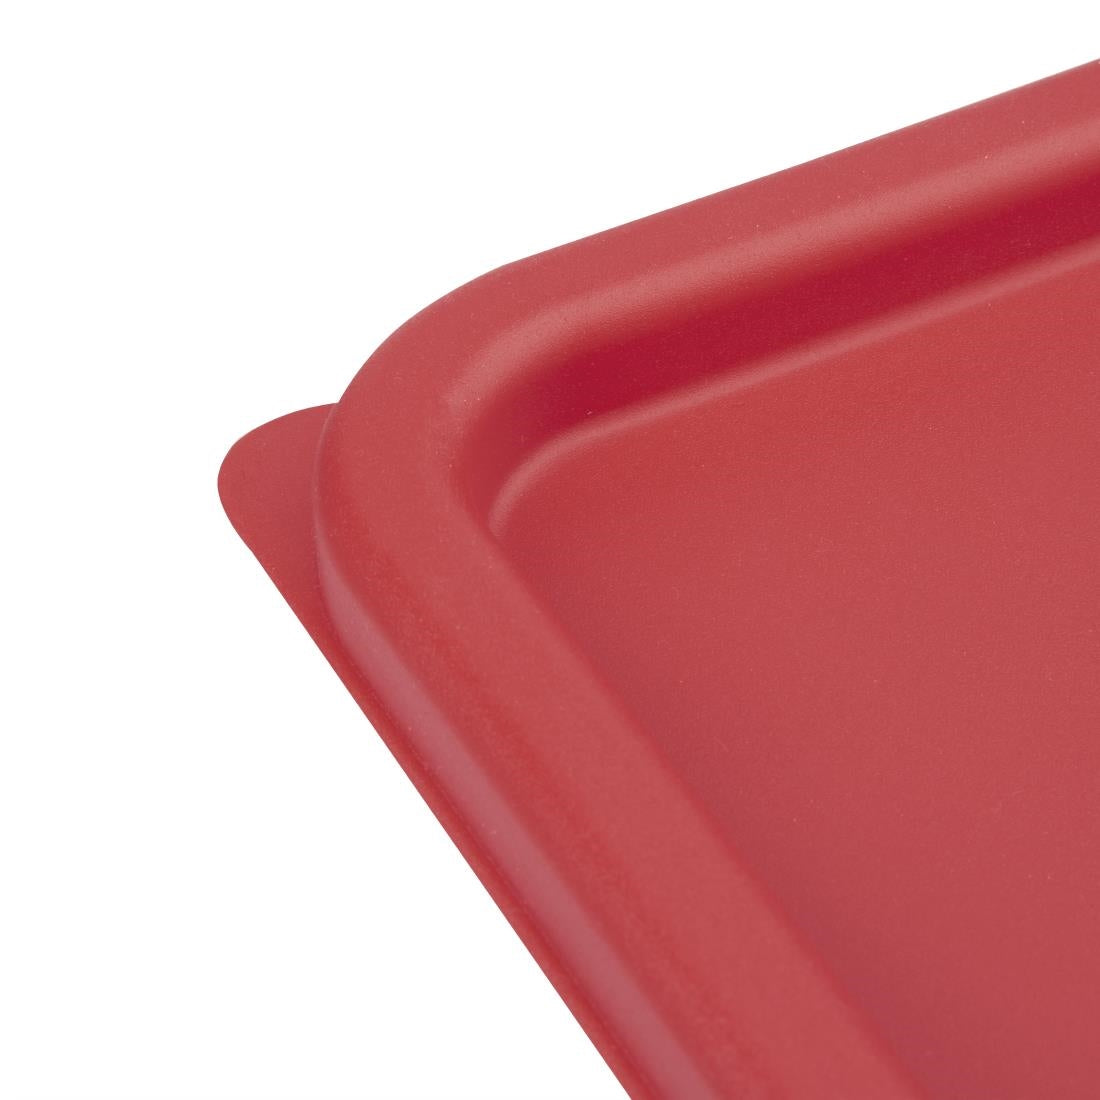 Vogue Square Food Storage Container Lid Red Large